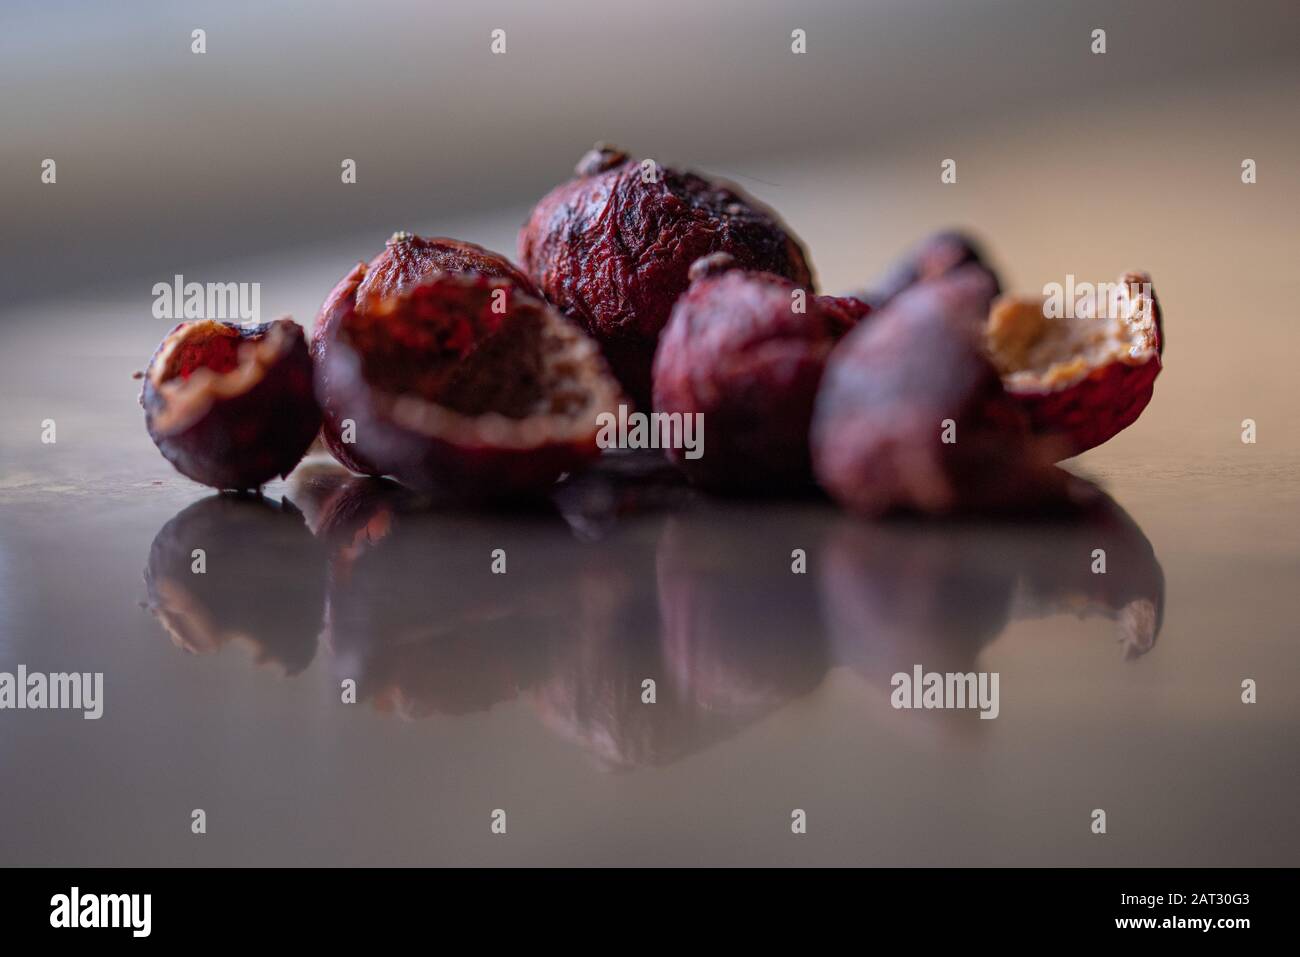 Dried quandong on bartop Stock Photo